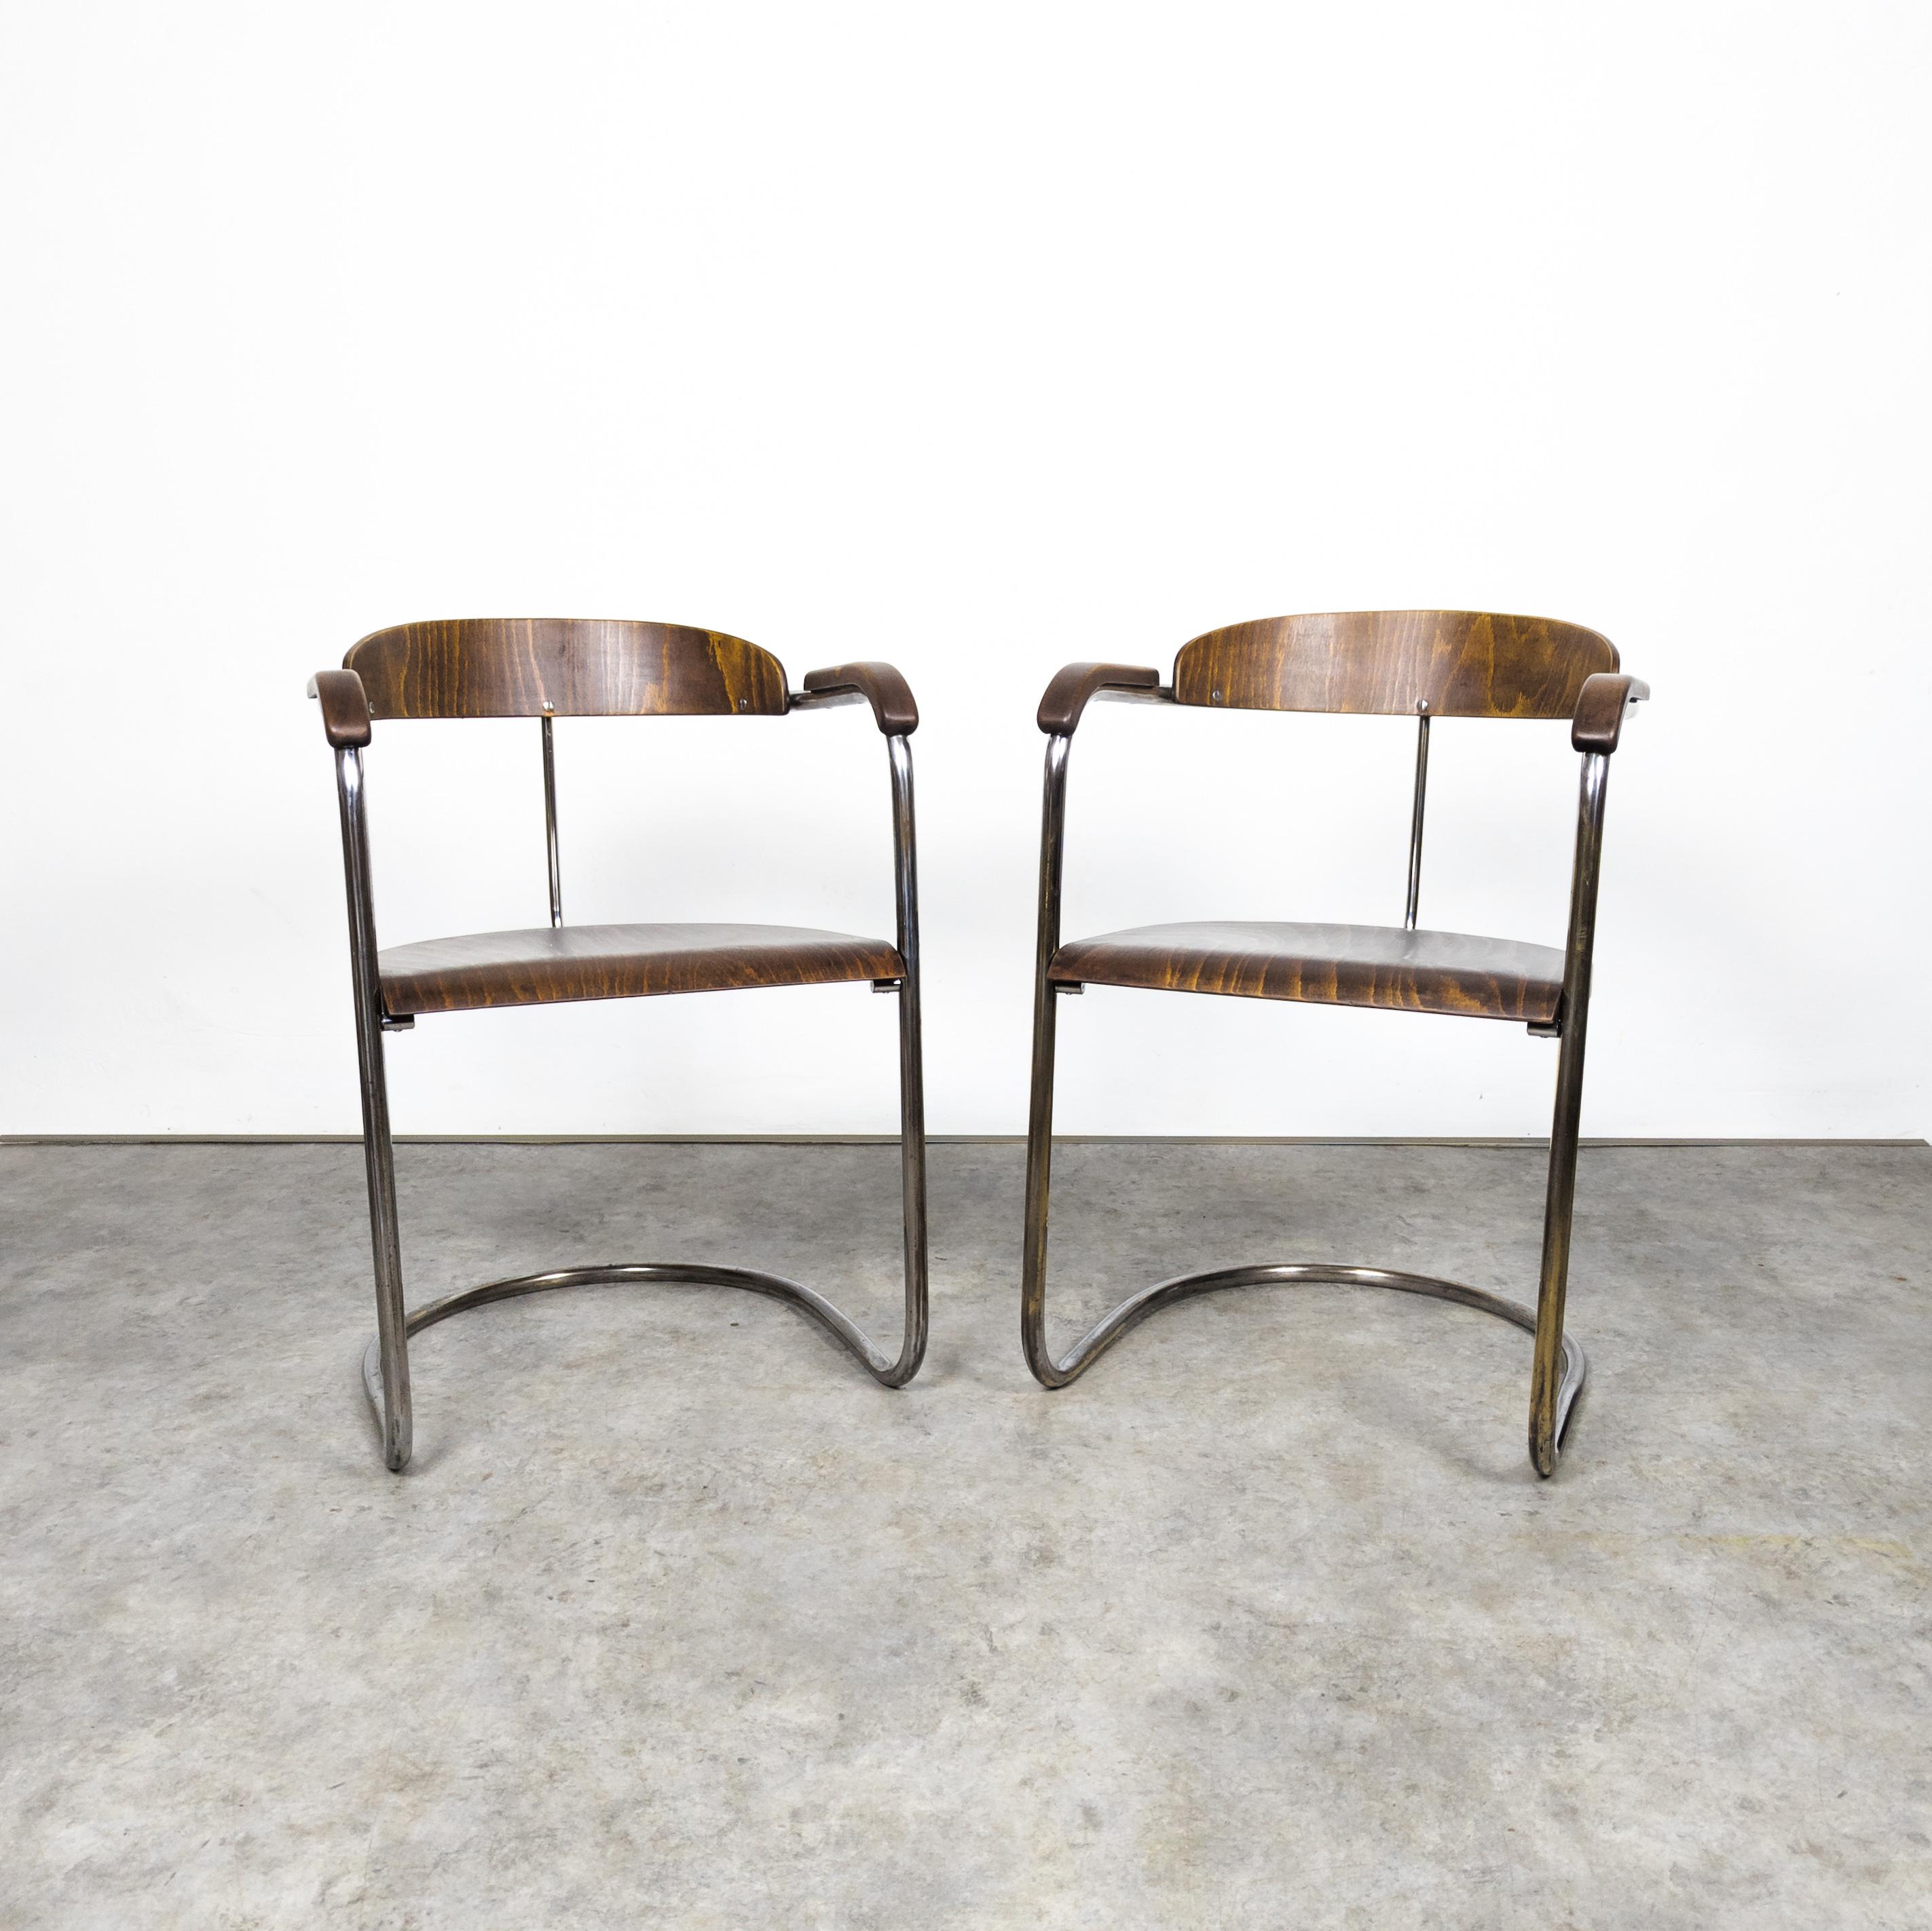 Rare variant of SS 33 armchairs, designed by Hans & Wassily Luckhardt in 1935 originally for Desta. These examples were manufactured by Gottwald, former Czechoslovakia, in the 1930s. Produced under catalogue number Ek 10, they are in remarkably